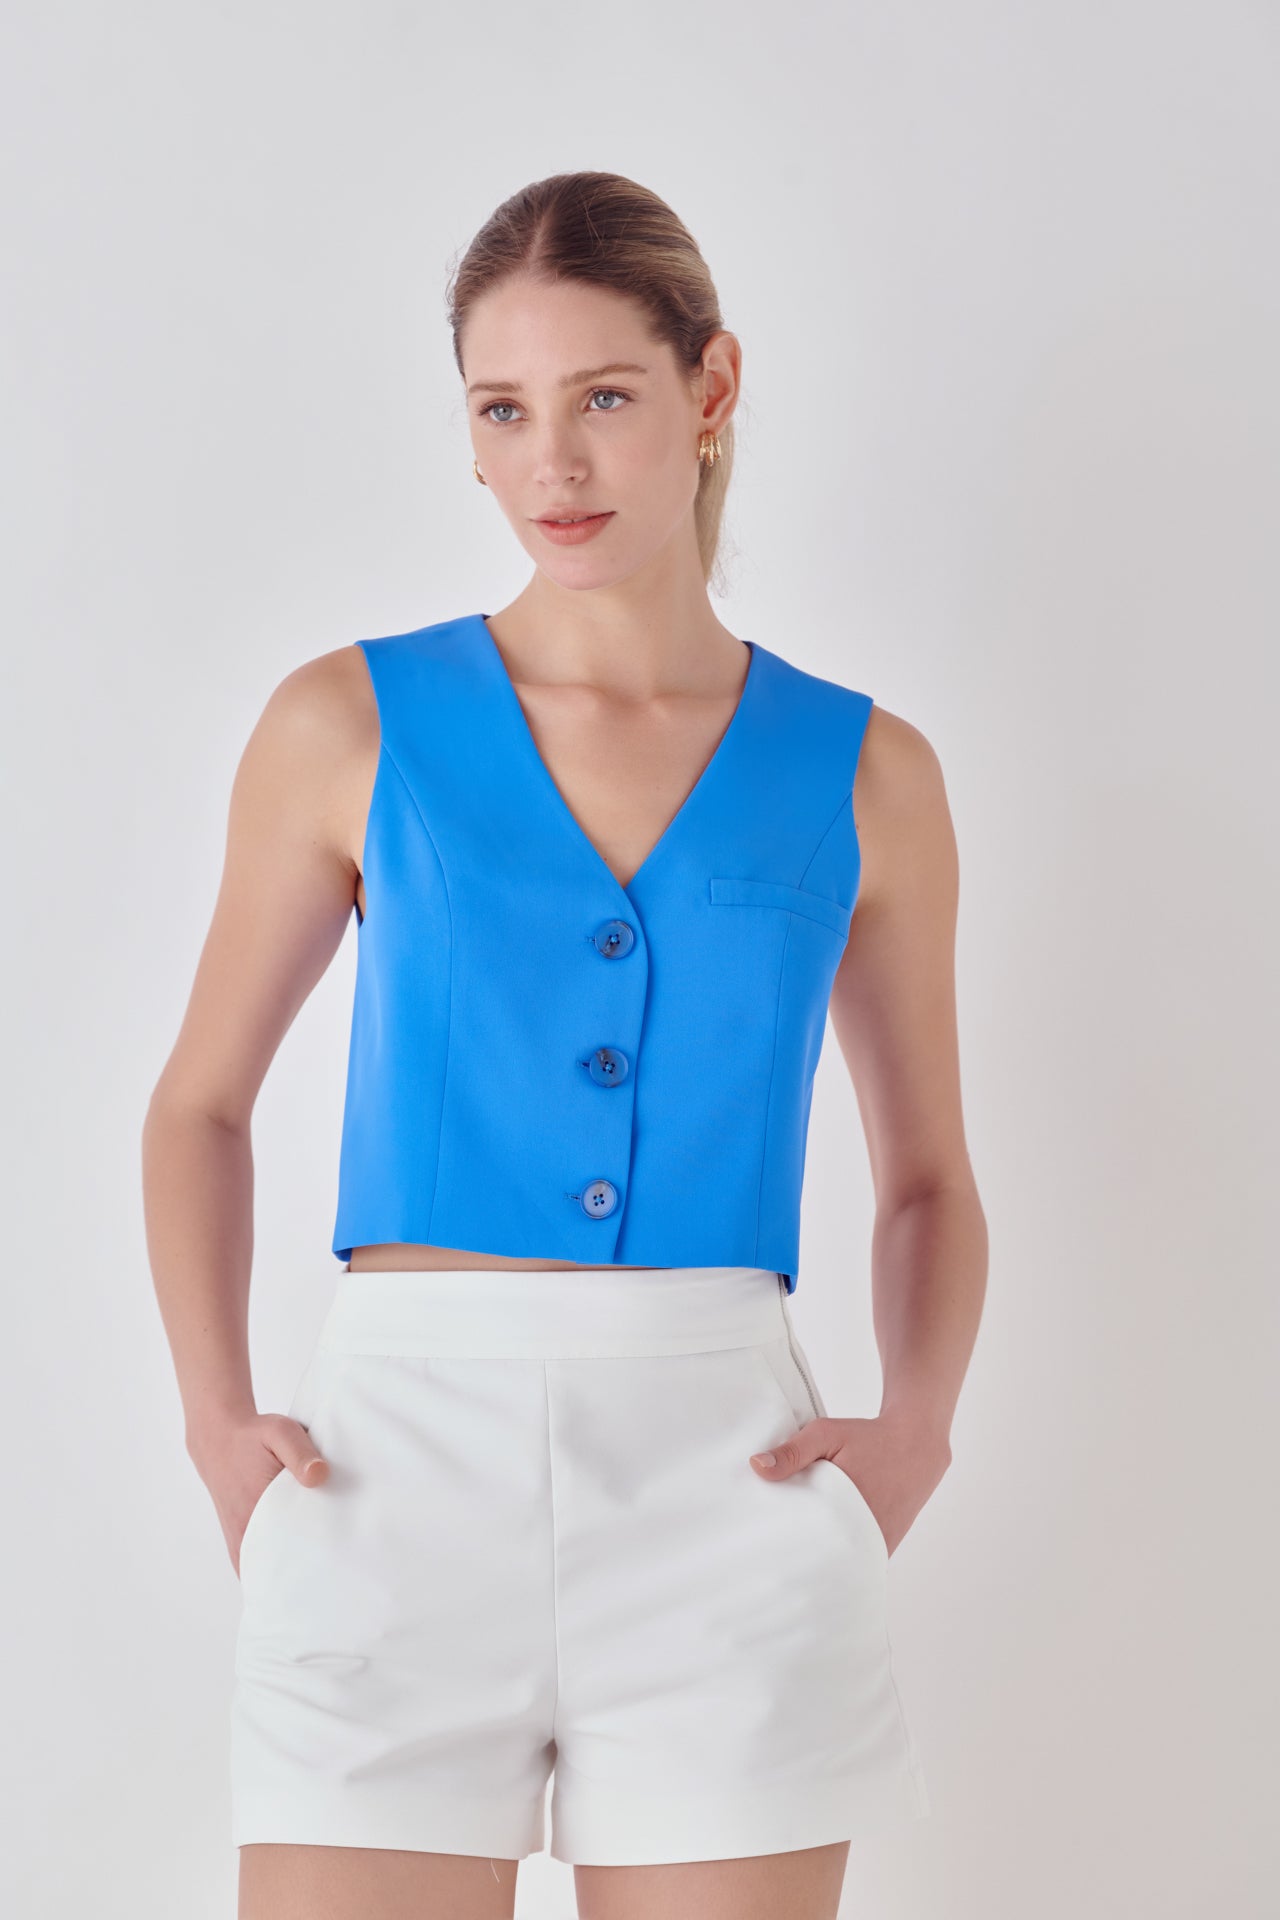 ENDLESS ROSE - Suit Vest Top - TOPS available at Objectrare